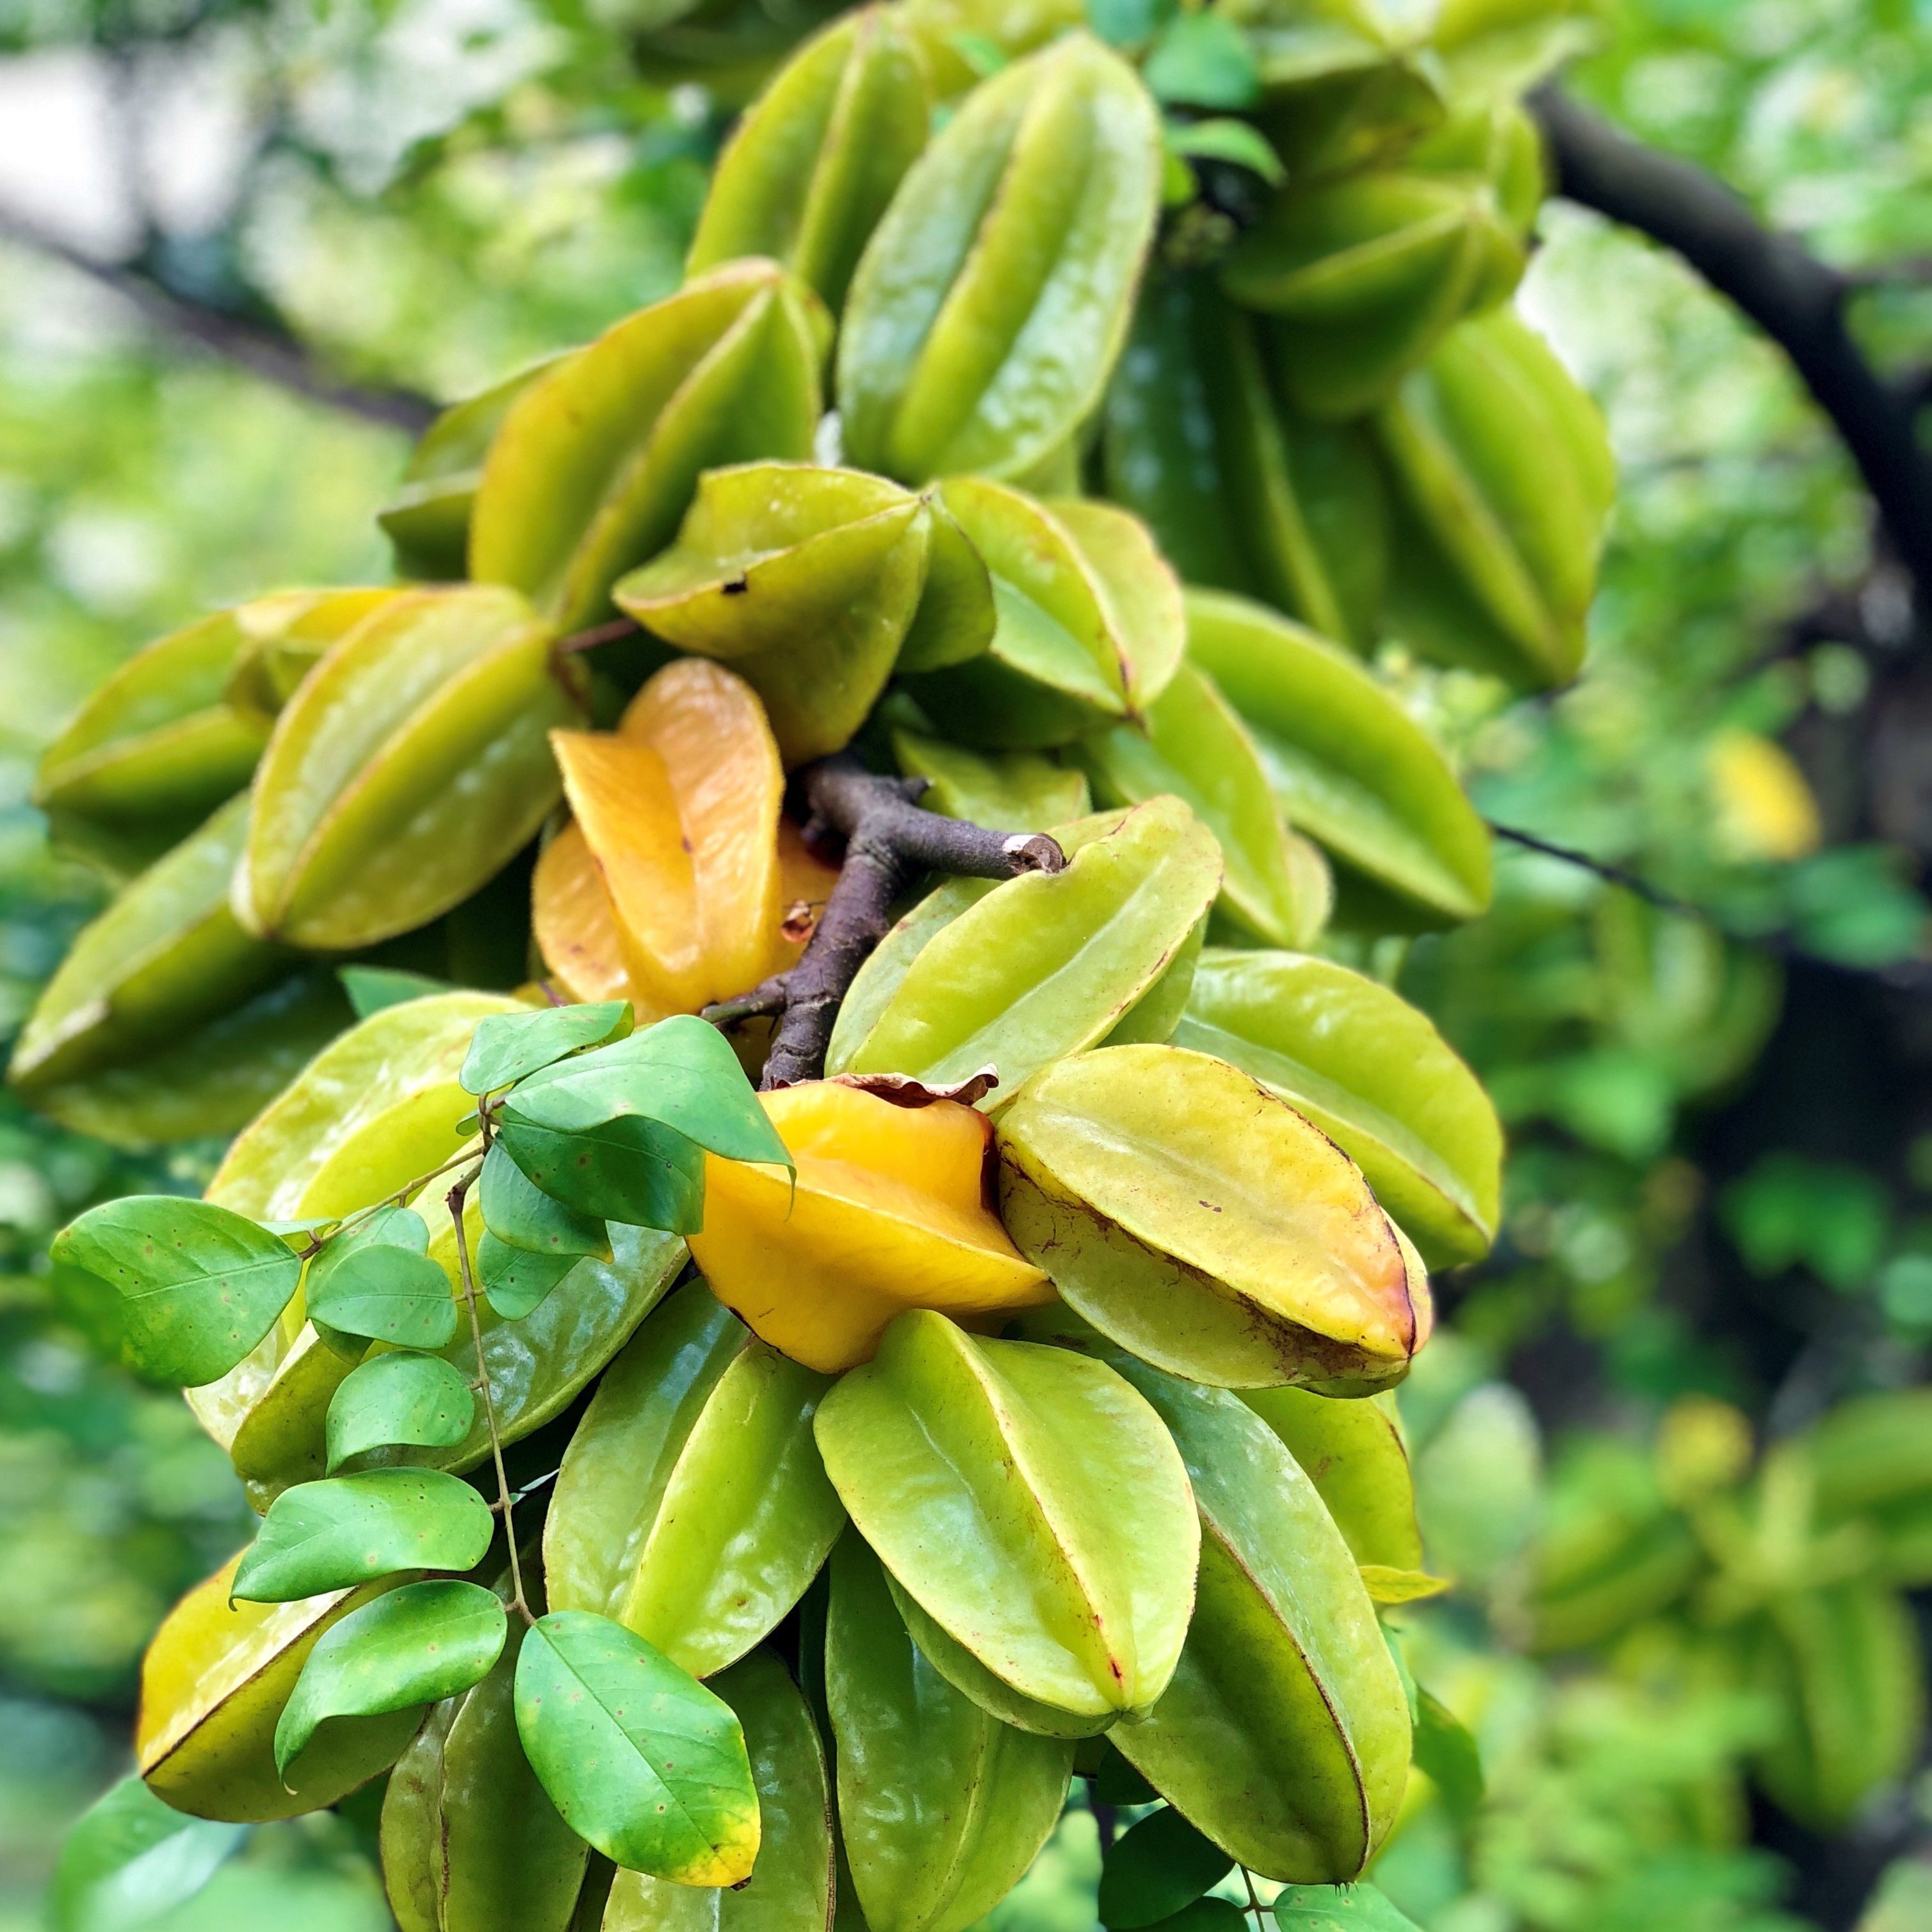 Carambolau2019s skin is edible and the flesh has a mild, sour flavour that makes it popular in a number of dishes. Photo/Net